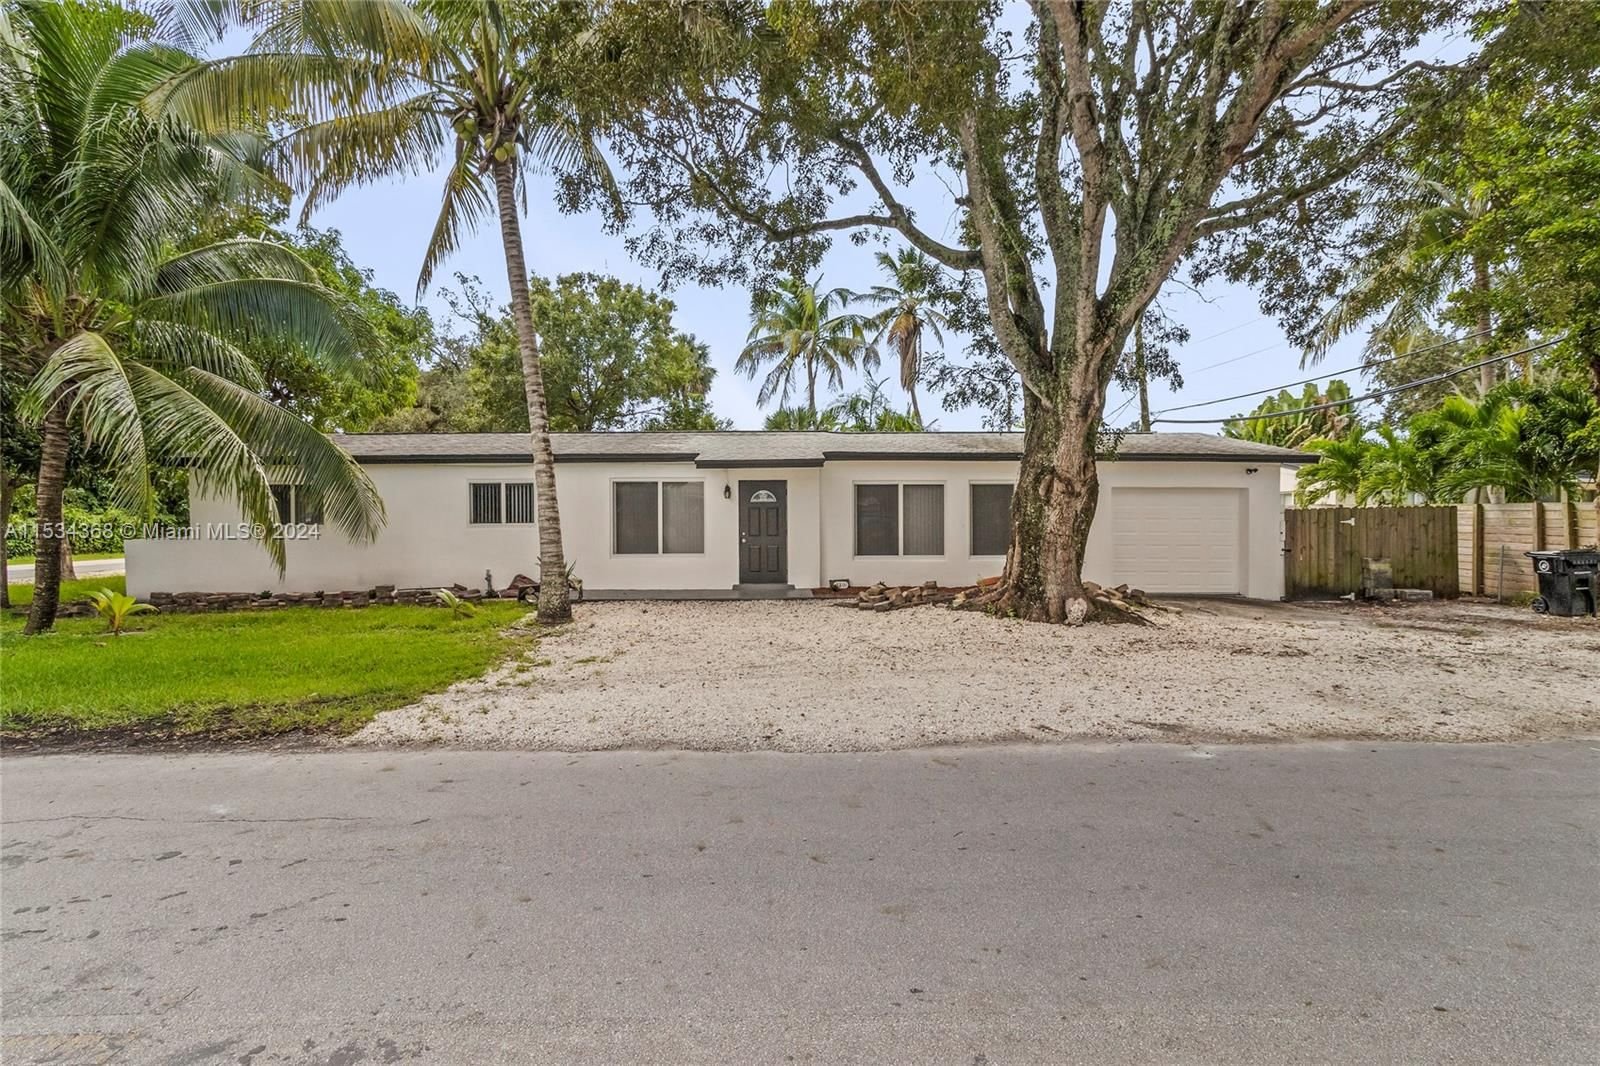 Real estate property located at 3201 9th Ave, Broward County, OAK GROVE, Fort Lauderdale, FL